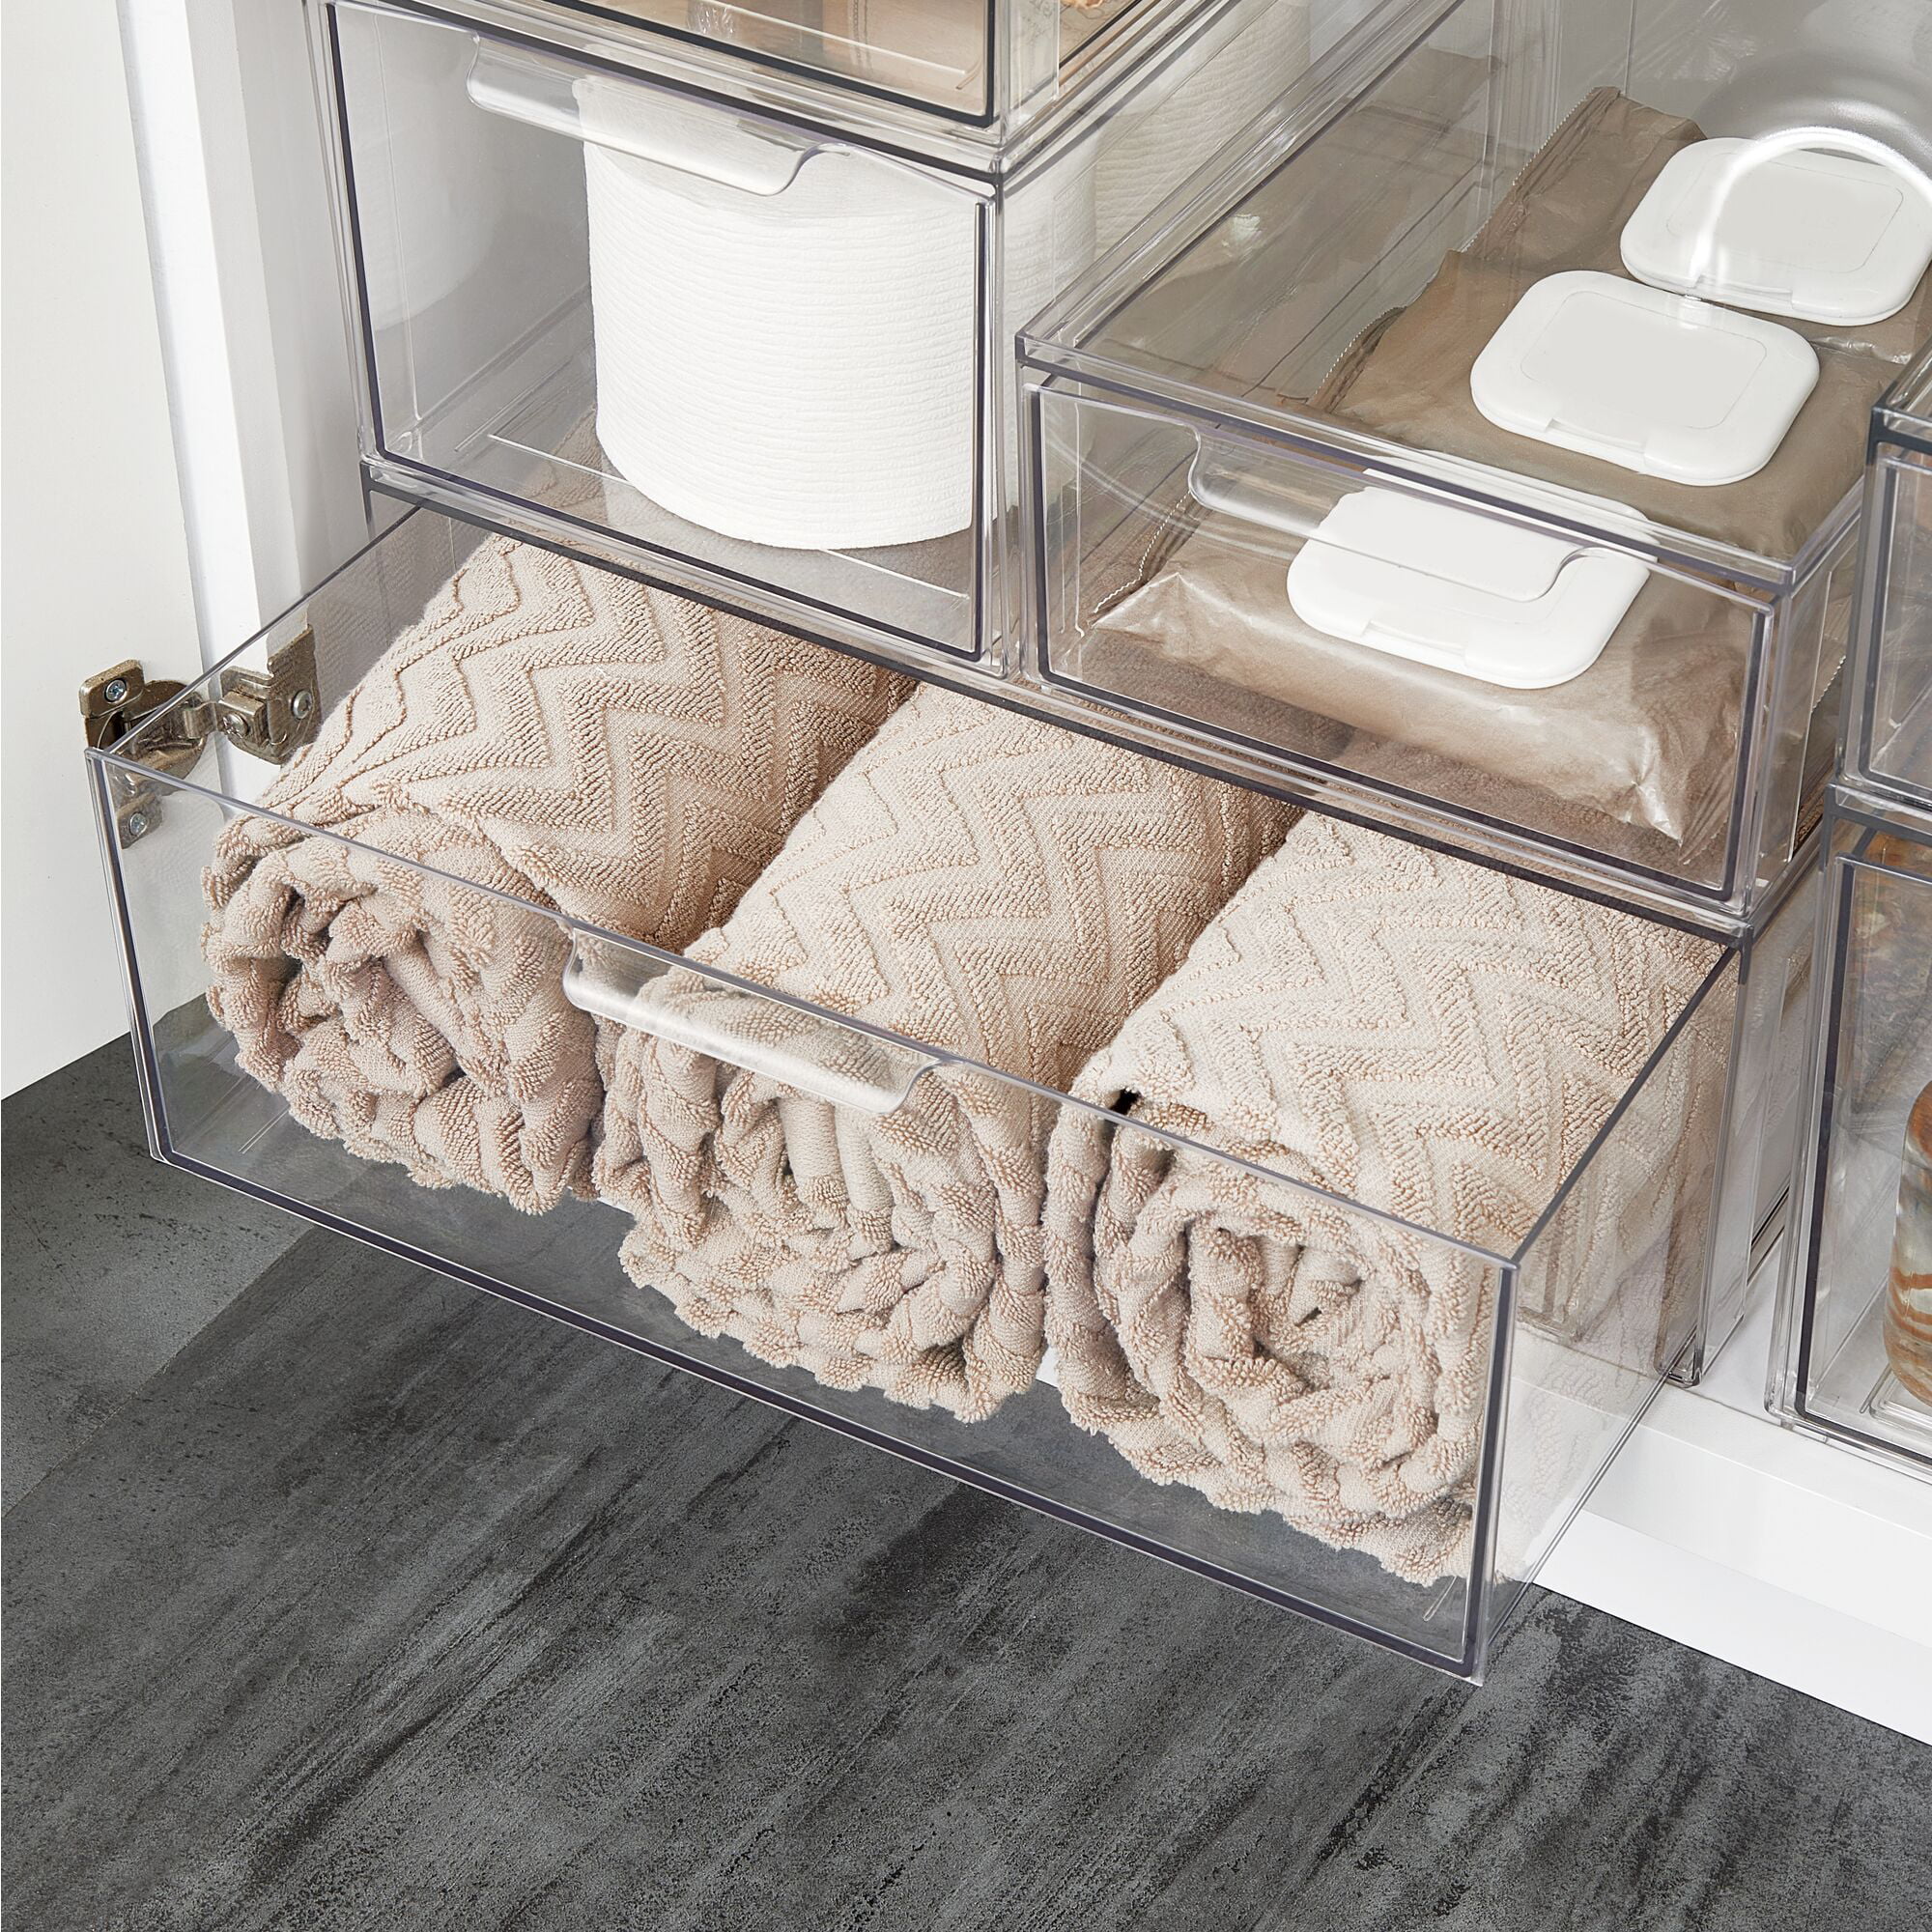 mDesign Plastic Stackable Bathroom Storage Organizer Bin Containers with  Front Pull Drawer for Bathroom Countertop, Vanity, Closet Shelves - Holder